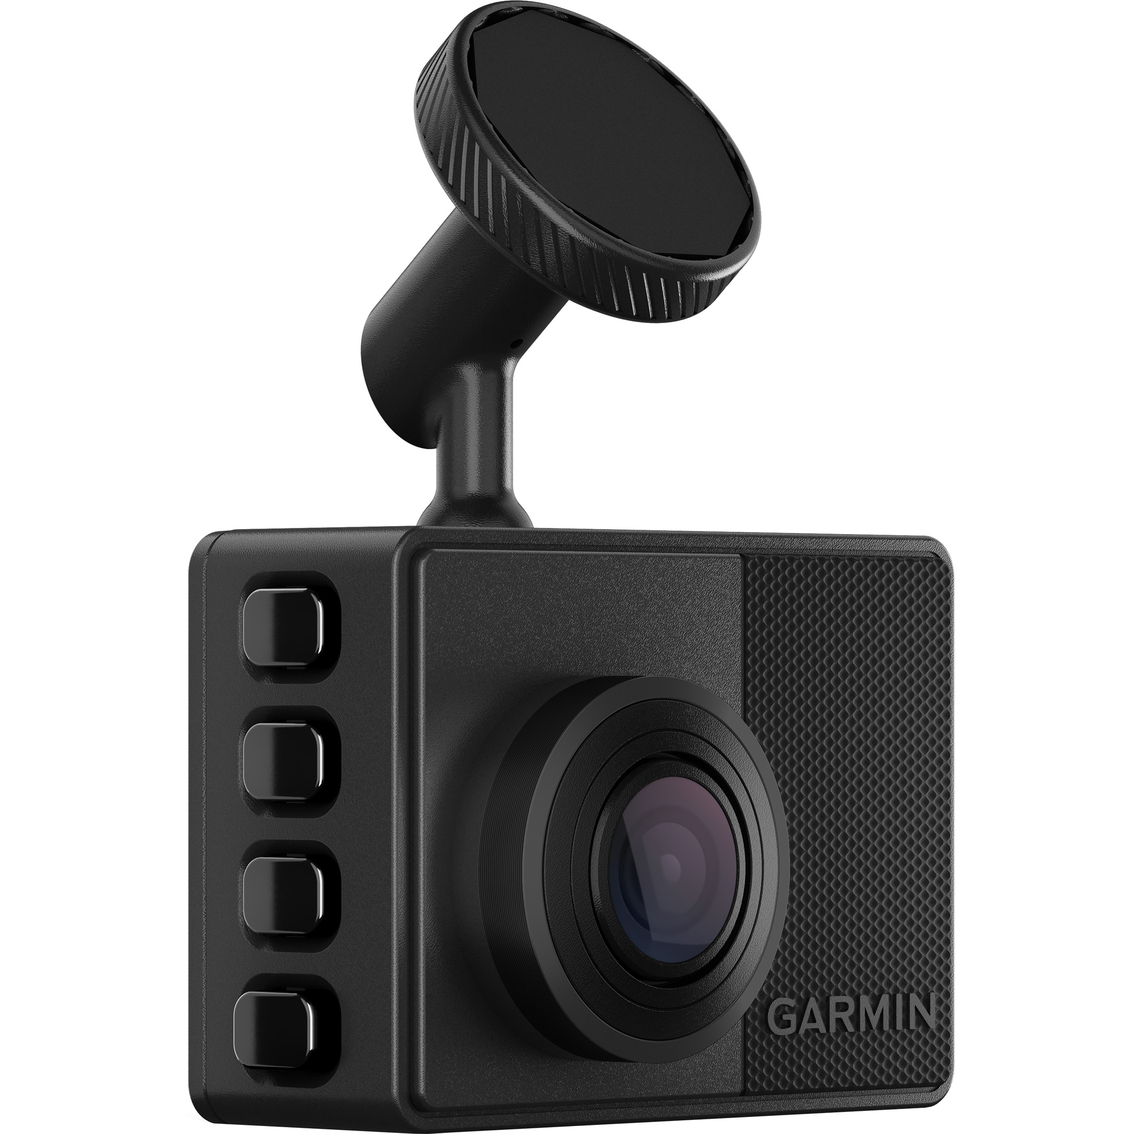 How Garmin Dash Cams and Vault Work Together to Give You Peace of Mind